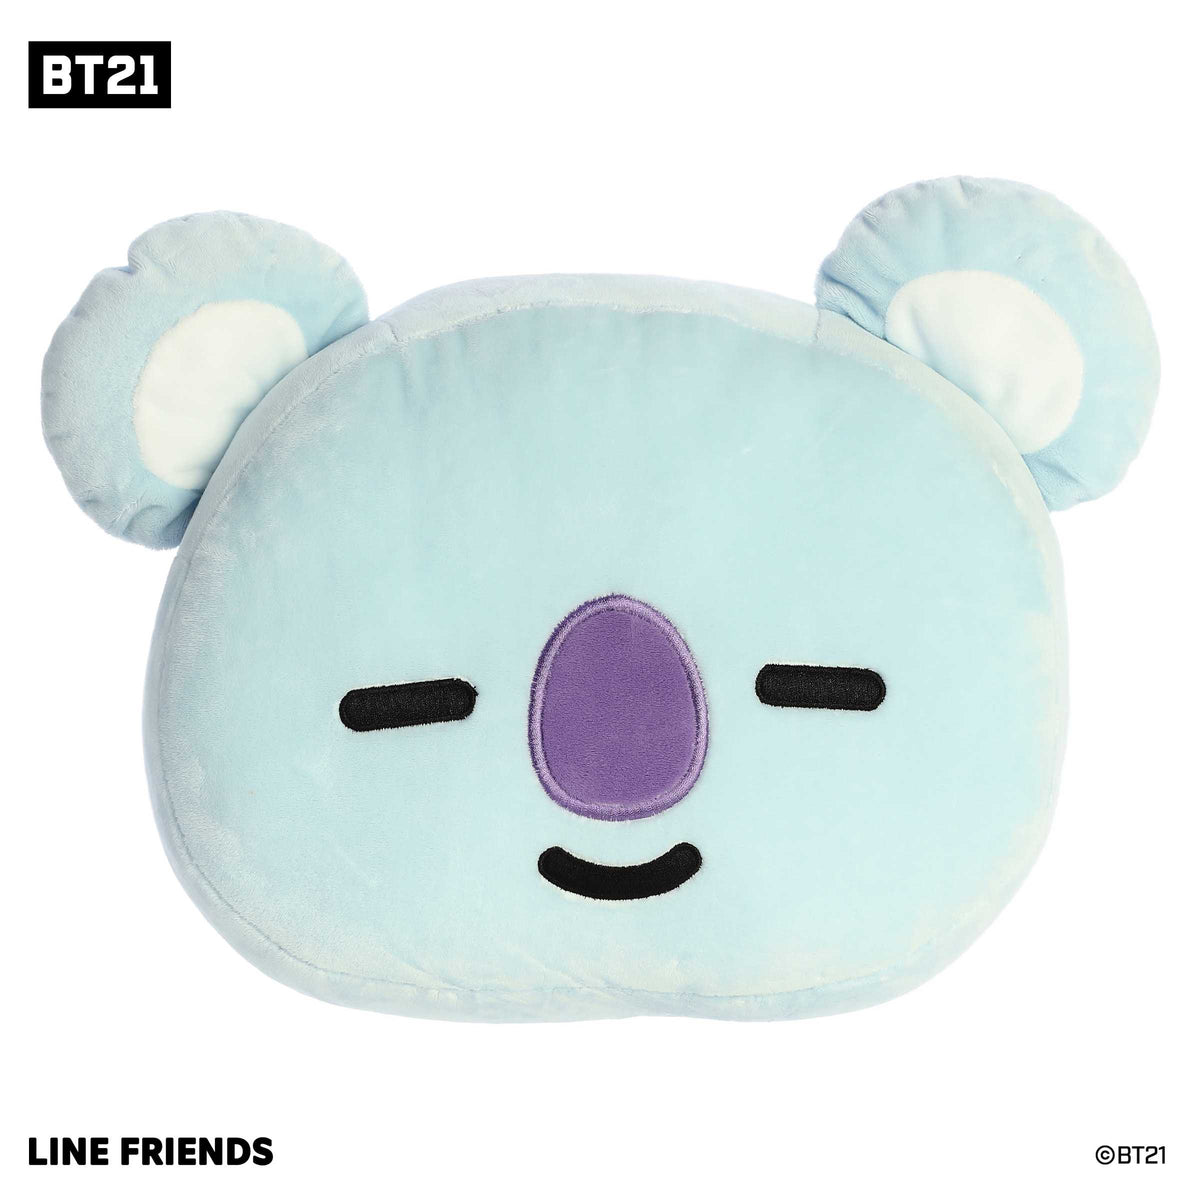 Serene light blue KOYA Large Plush by BT21, with white inner ears, purple nose, and a dreamy expression